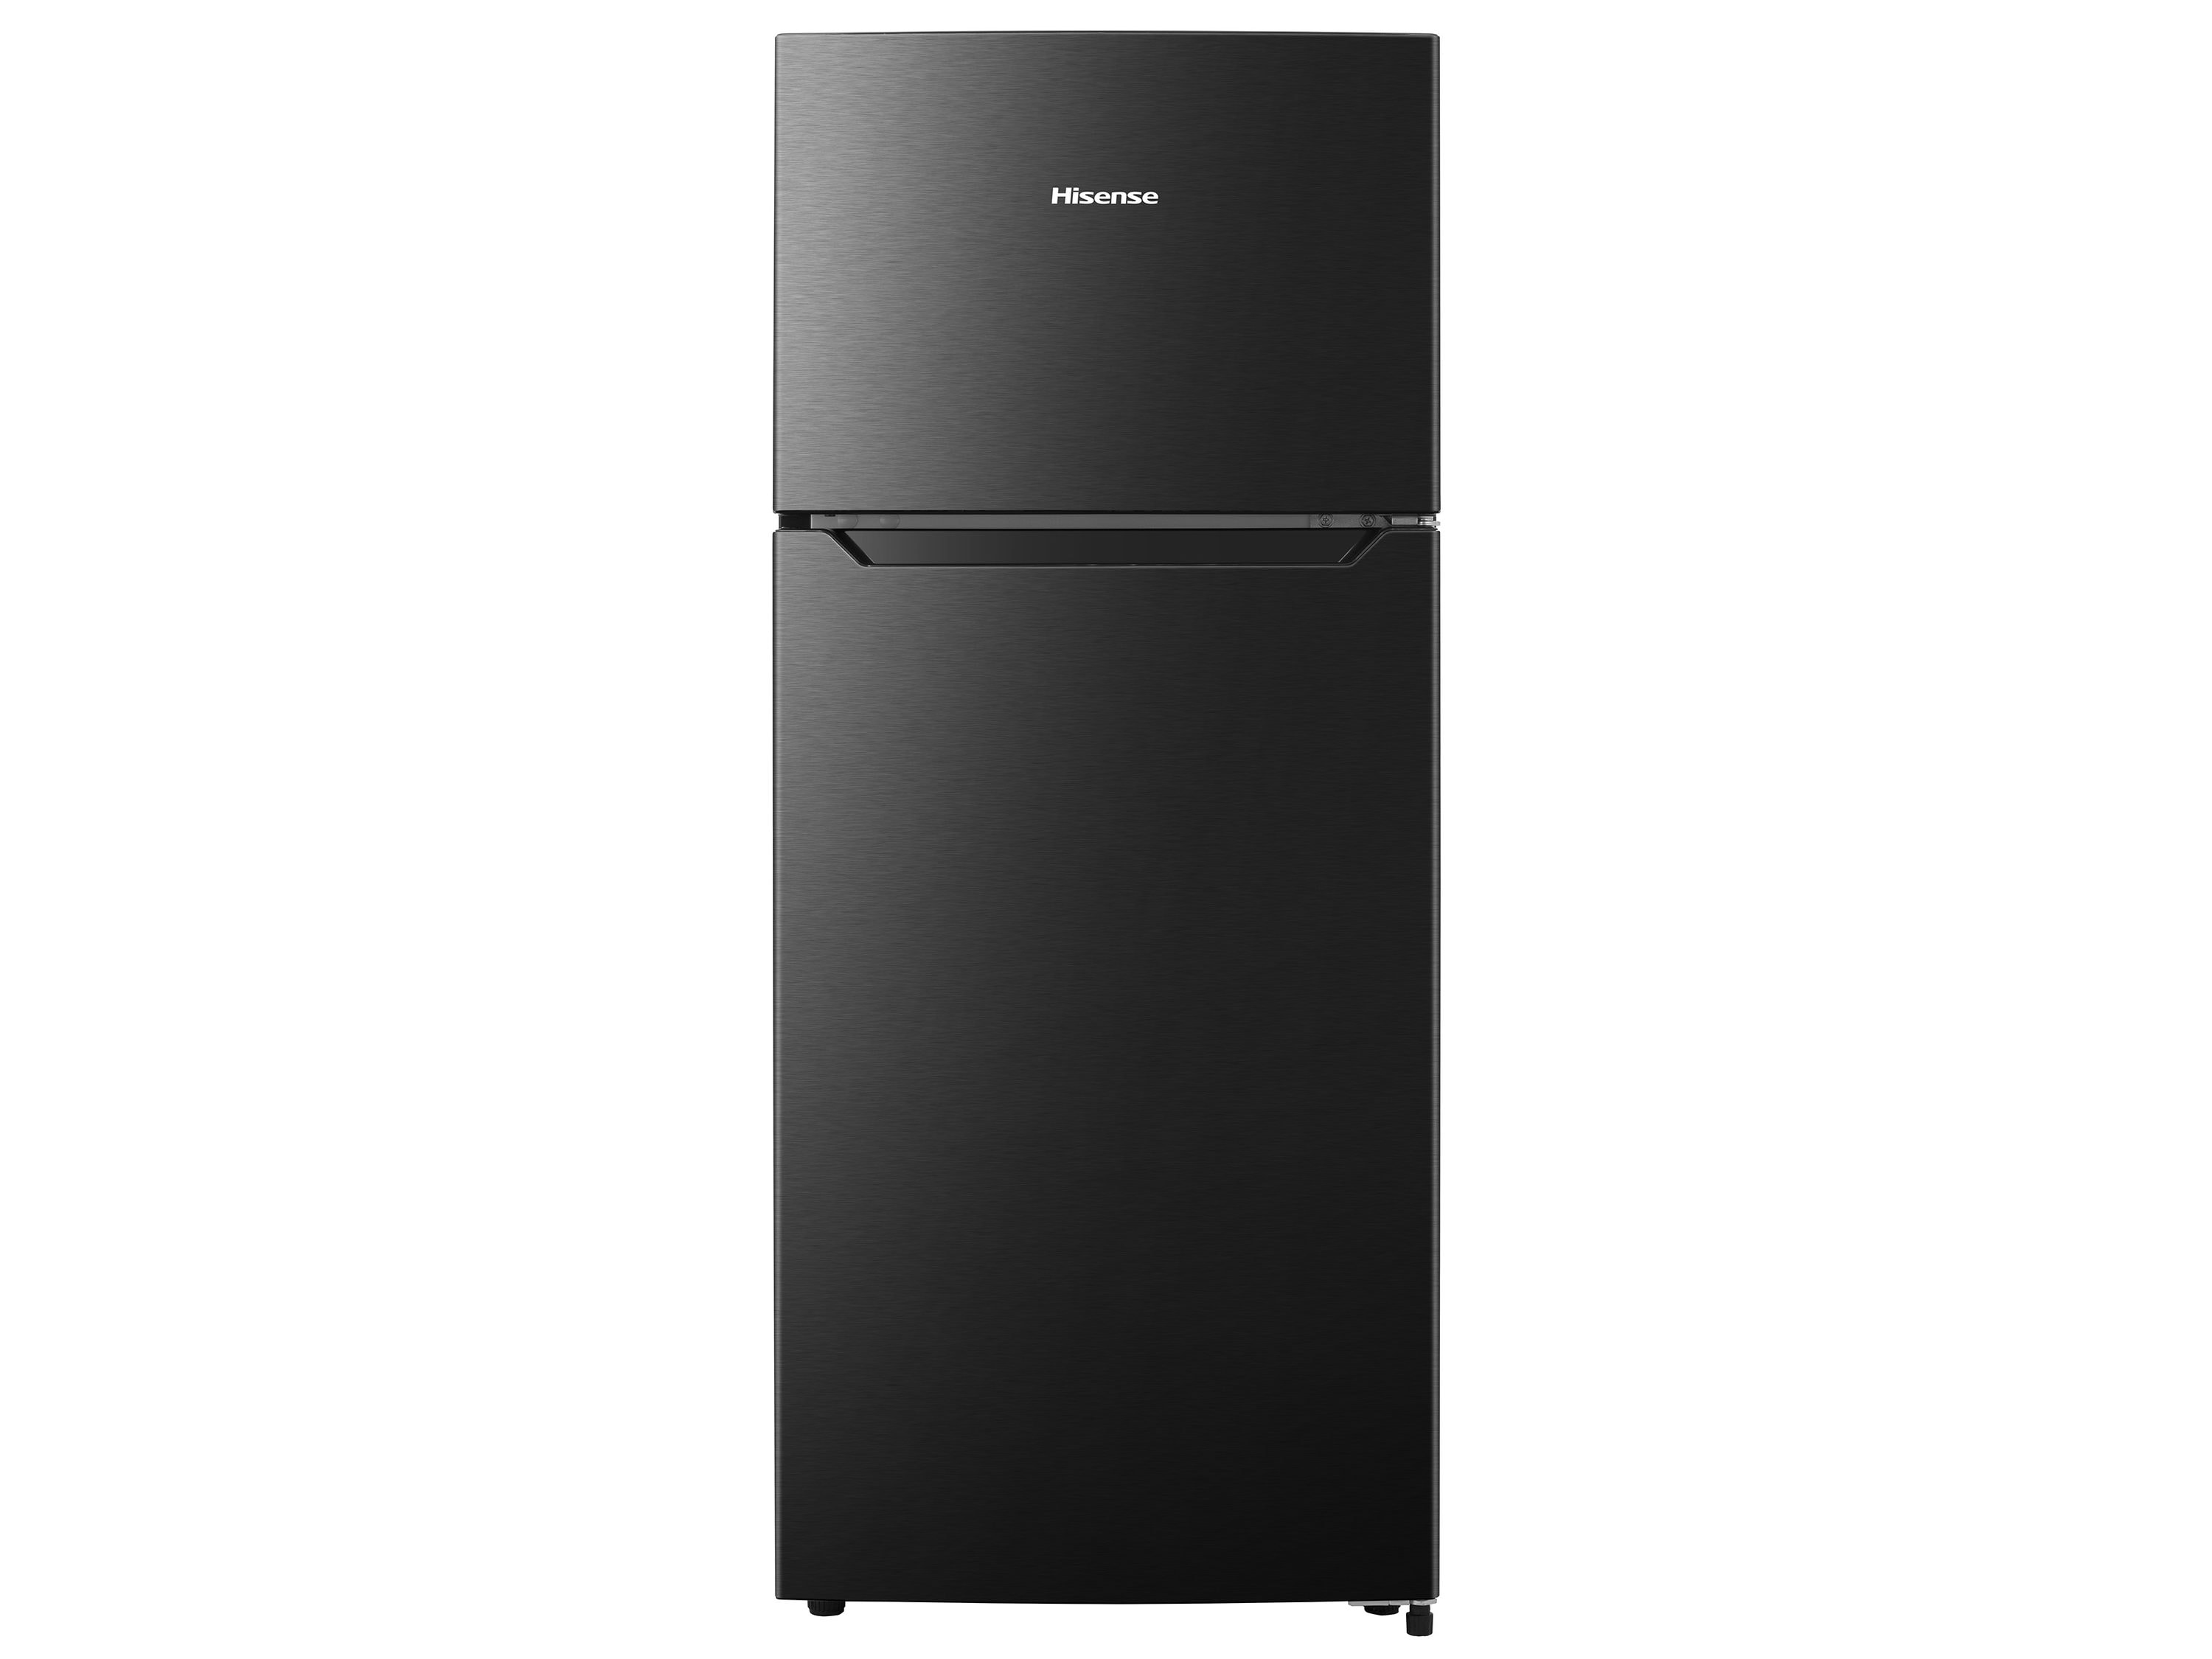 4.4 Cubic Foot Compact Refrigerator in Stainless Steel Hisense REFURBISHED 